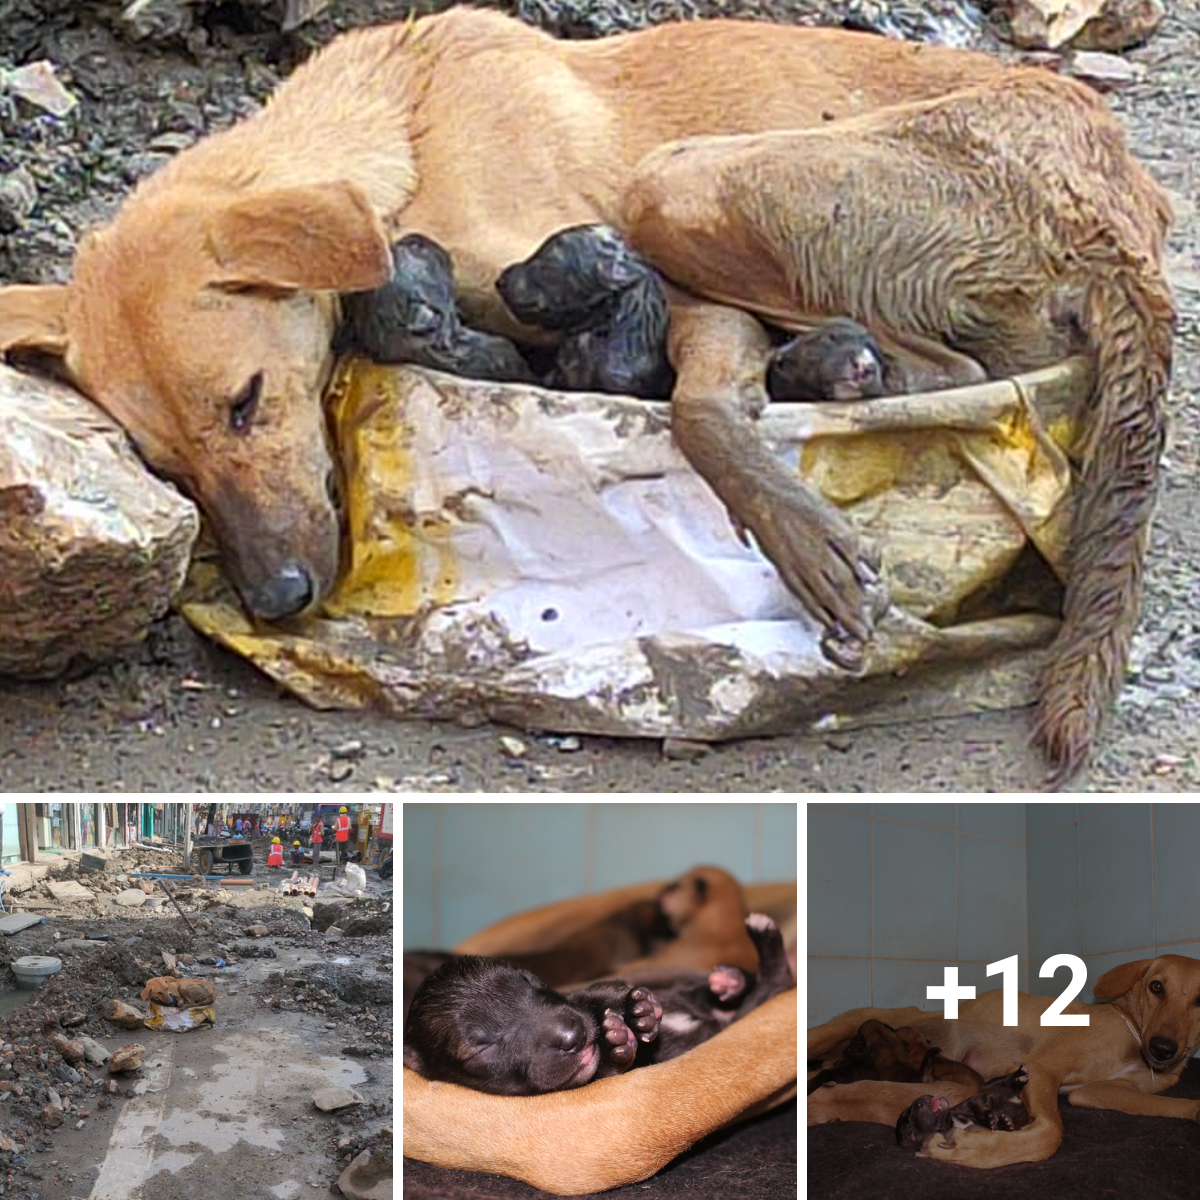 A stray dog gives birth bravely in the middle of the wreckage, and she clings stubbornly to her puppies.